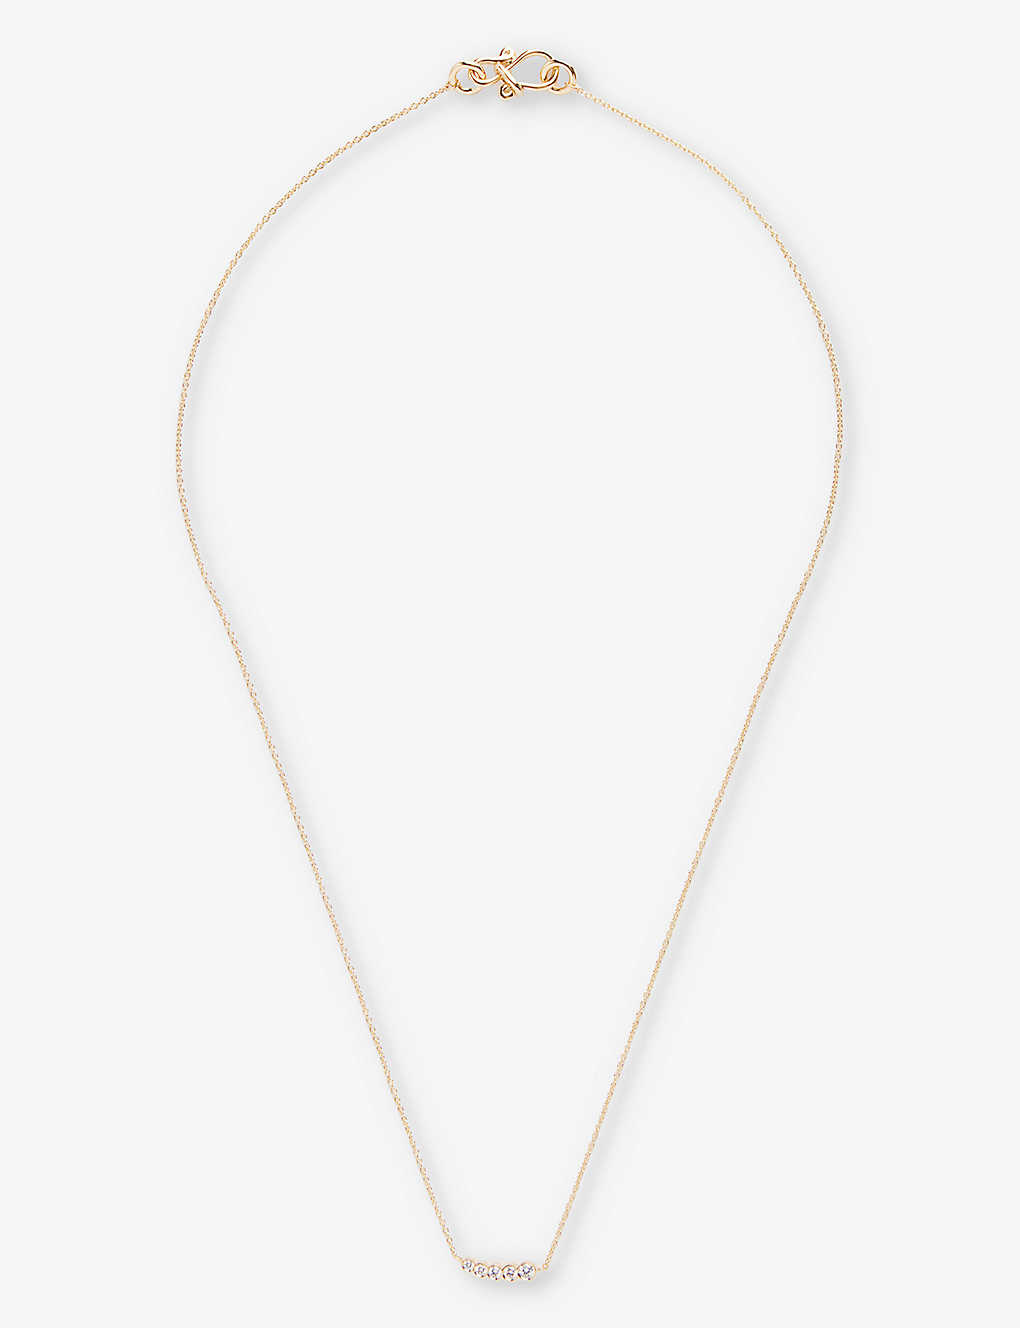 Sophie Bille Brahe Lune 18ct Yellow-gold And 0.11ct Diamond Necklace In 18k Gold